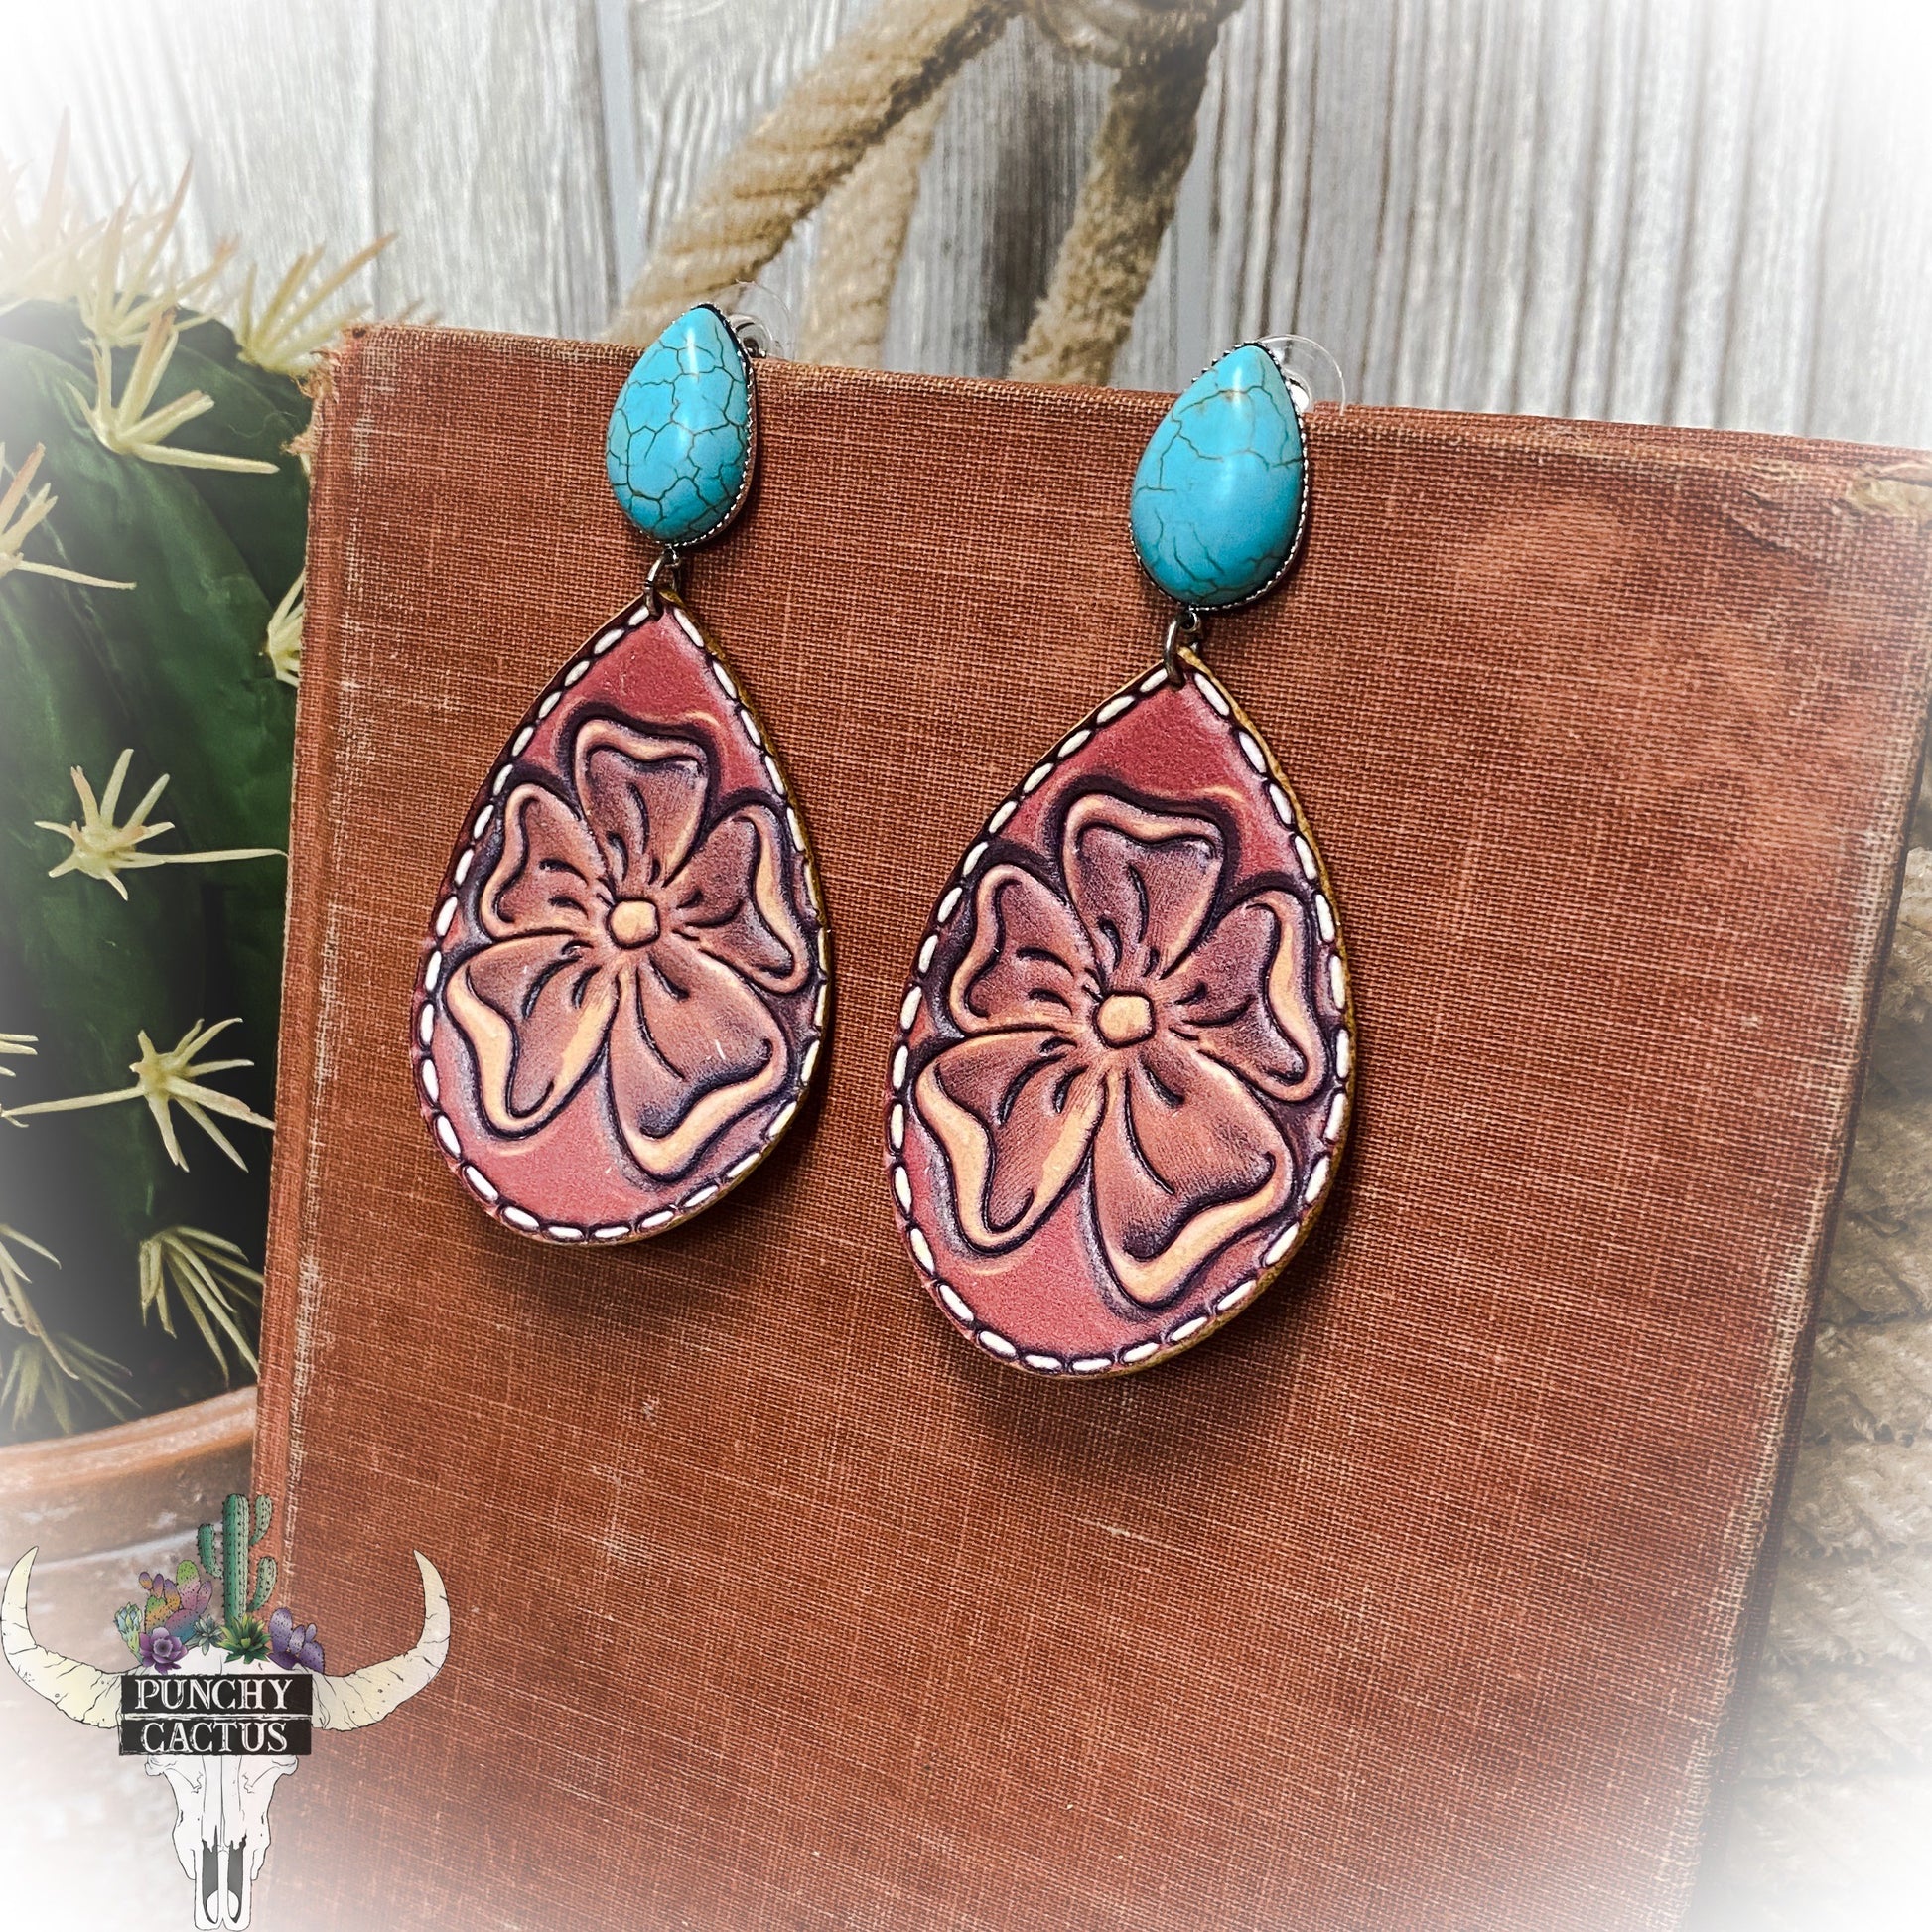 western floral tooled leather earrings with turquoise stone stud